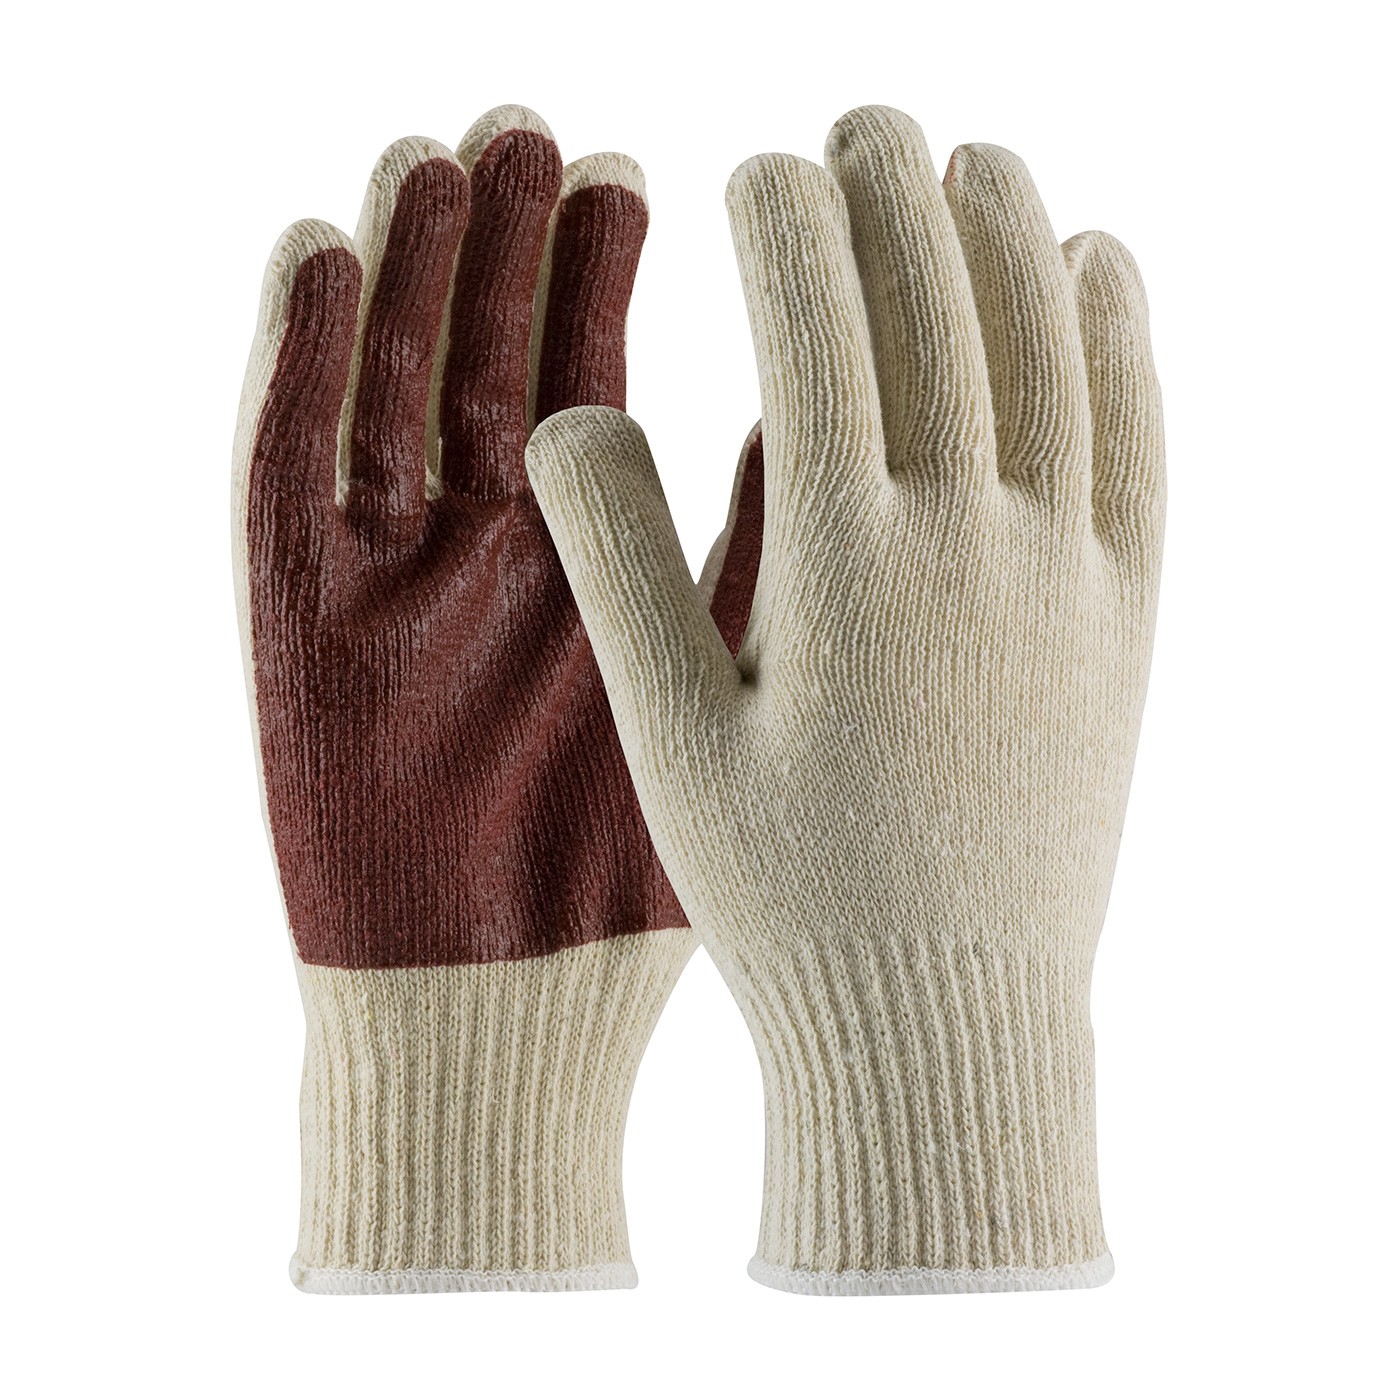  PIP® Seamless Knit Cotton / Polyester Glove with PVC Palm Coating  (#K708SPC)